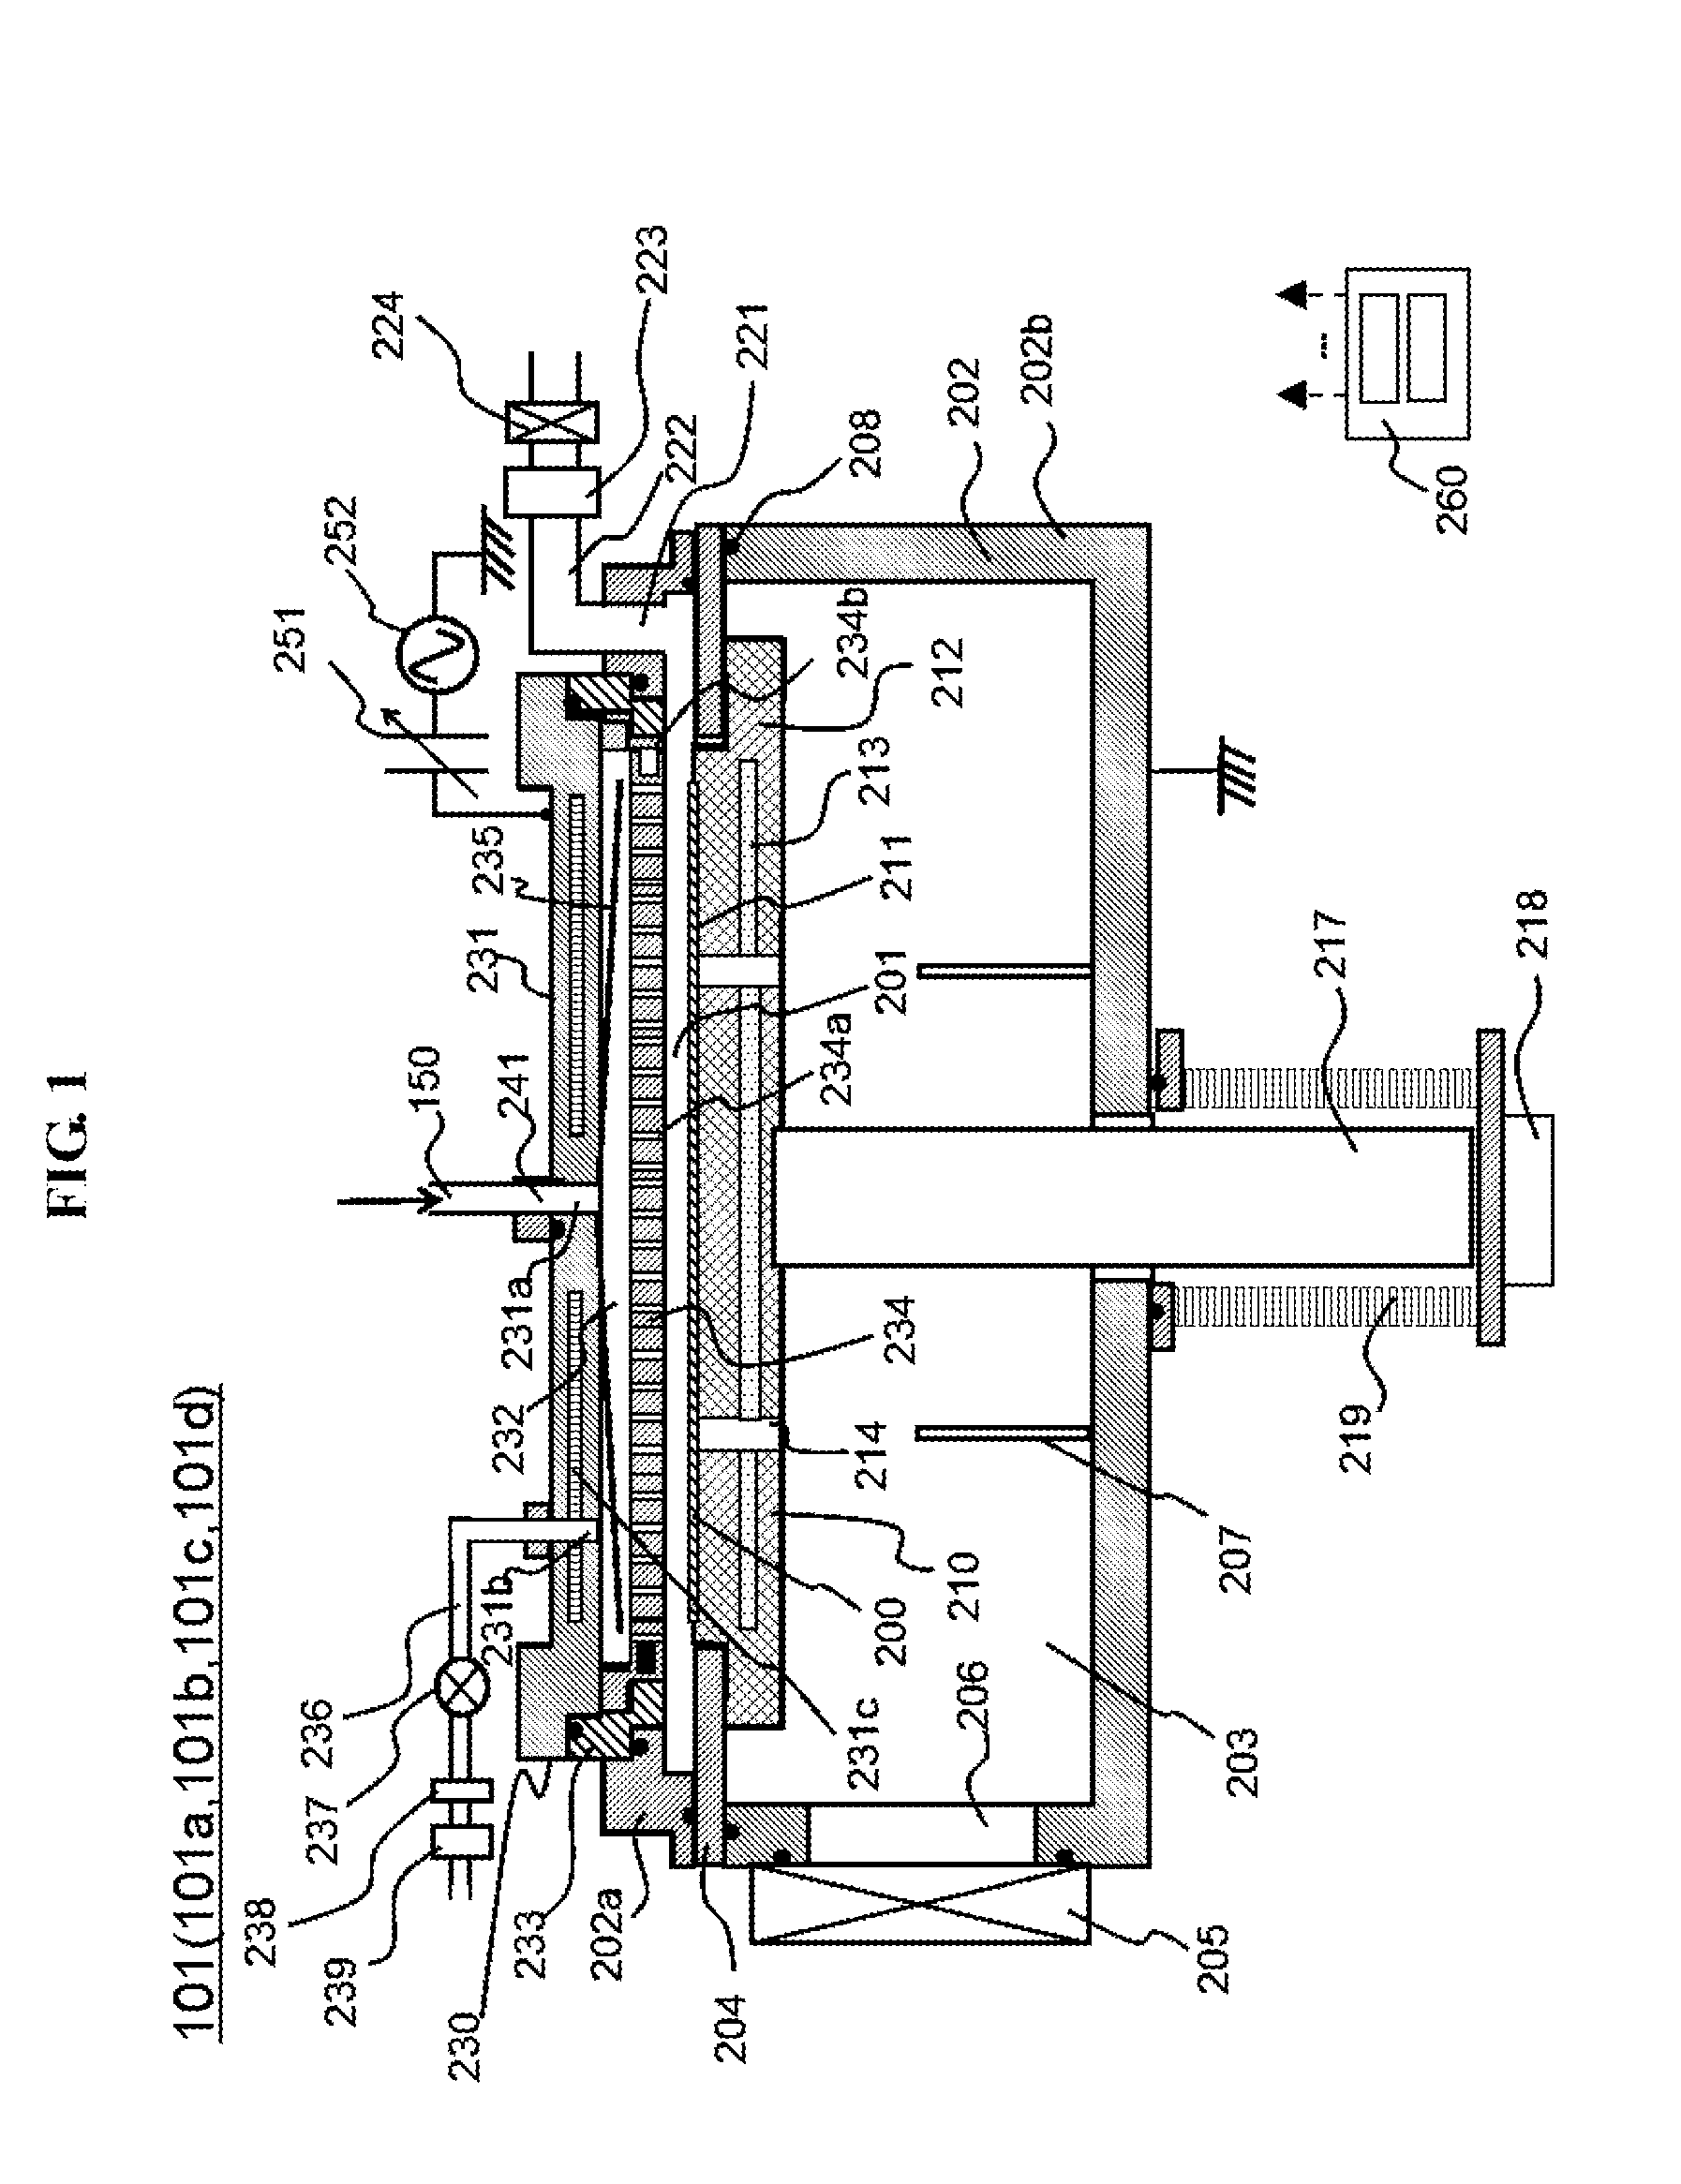 Substrate processing system, method of manufacturing semiconductor device and non-transitory computer-readable recording medium